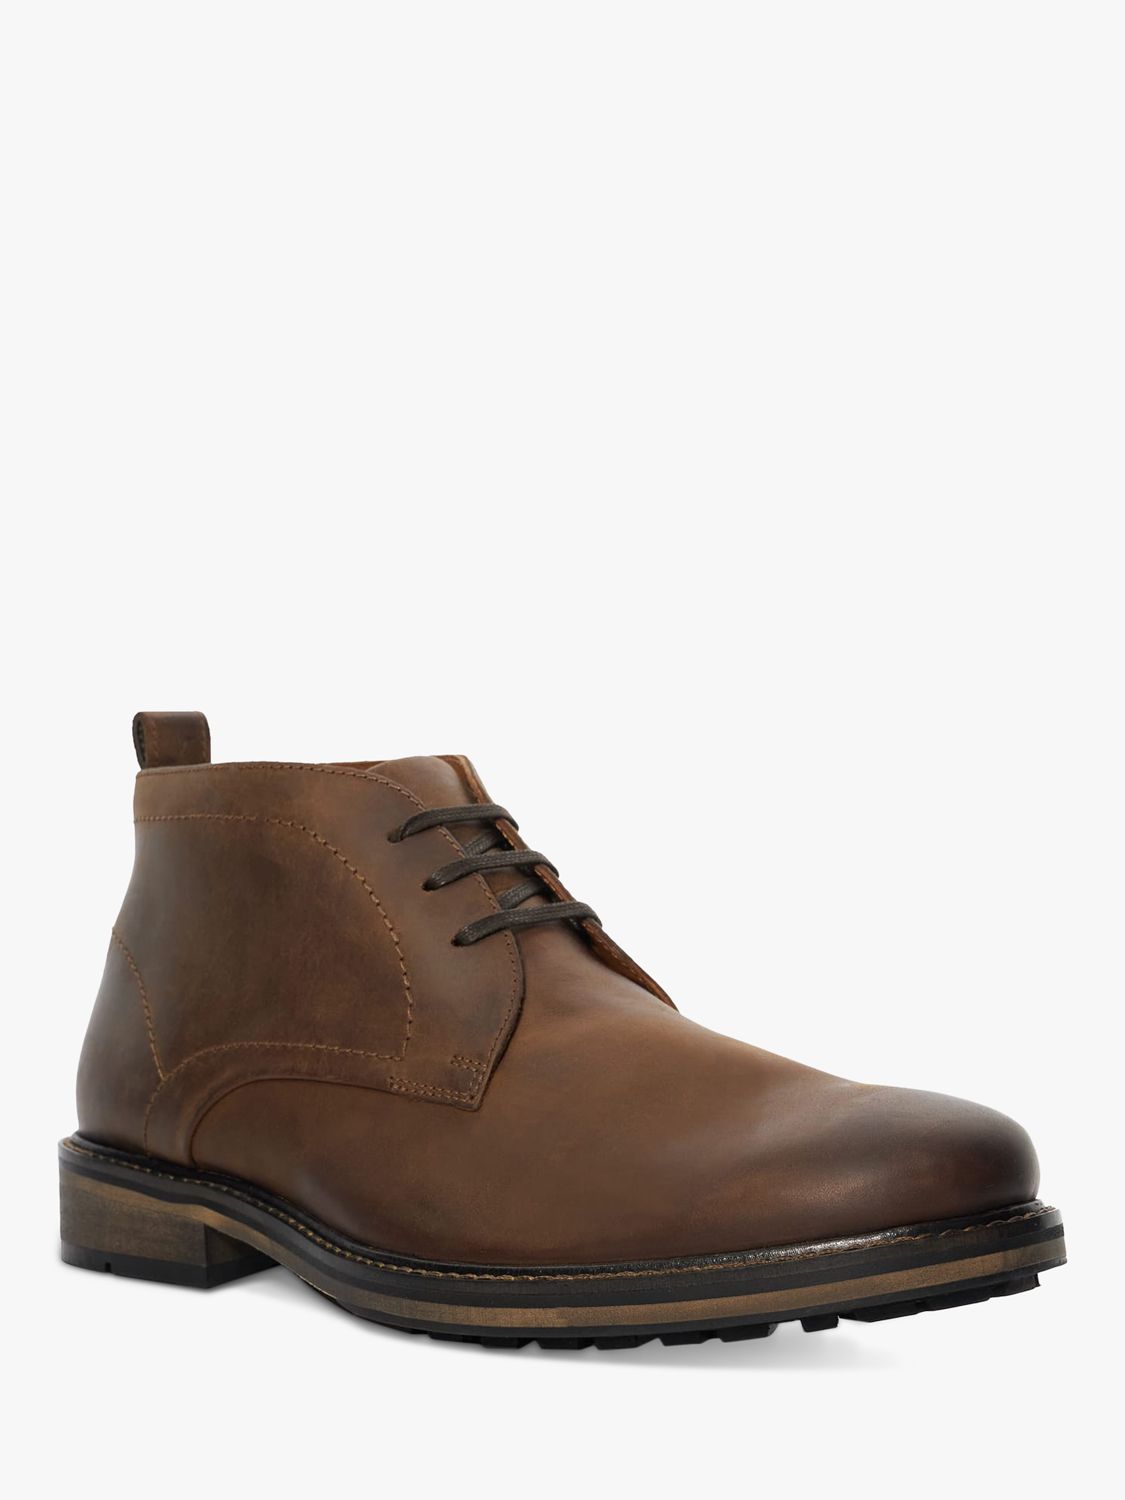 Dune Charleys Leather Chukka Boots, Brown at John Lewis & Partners